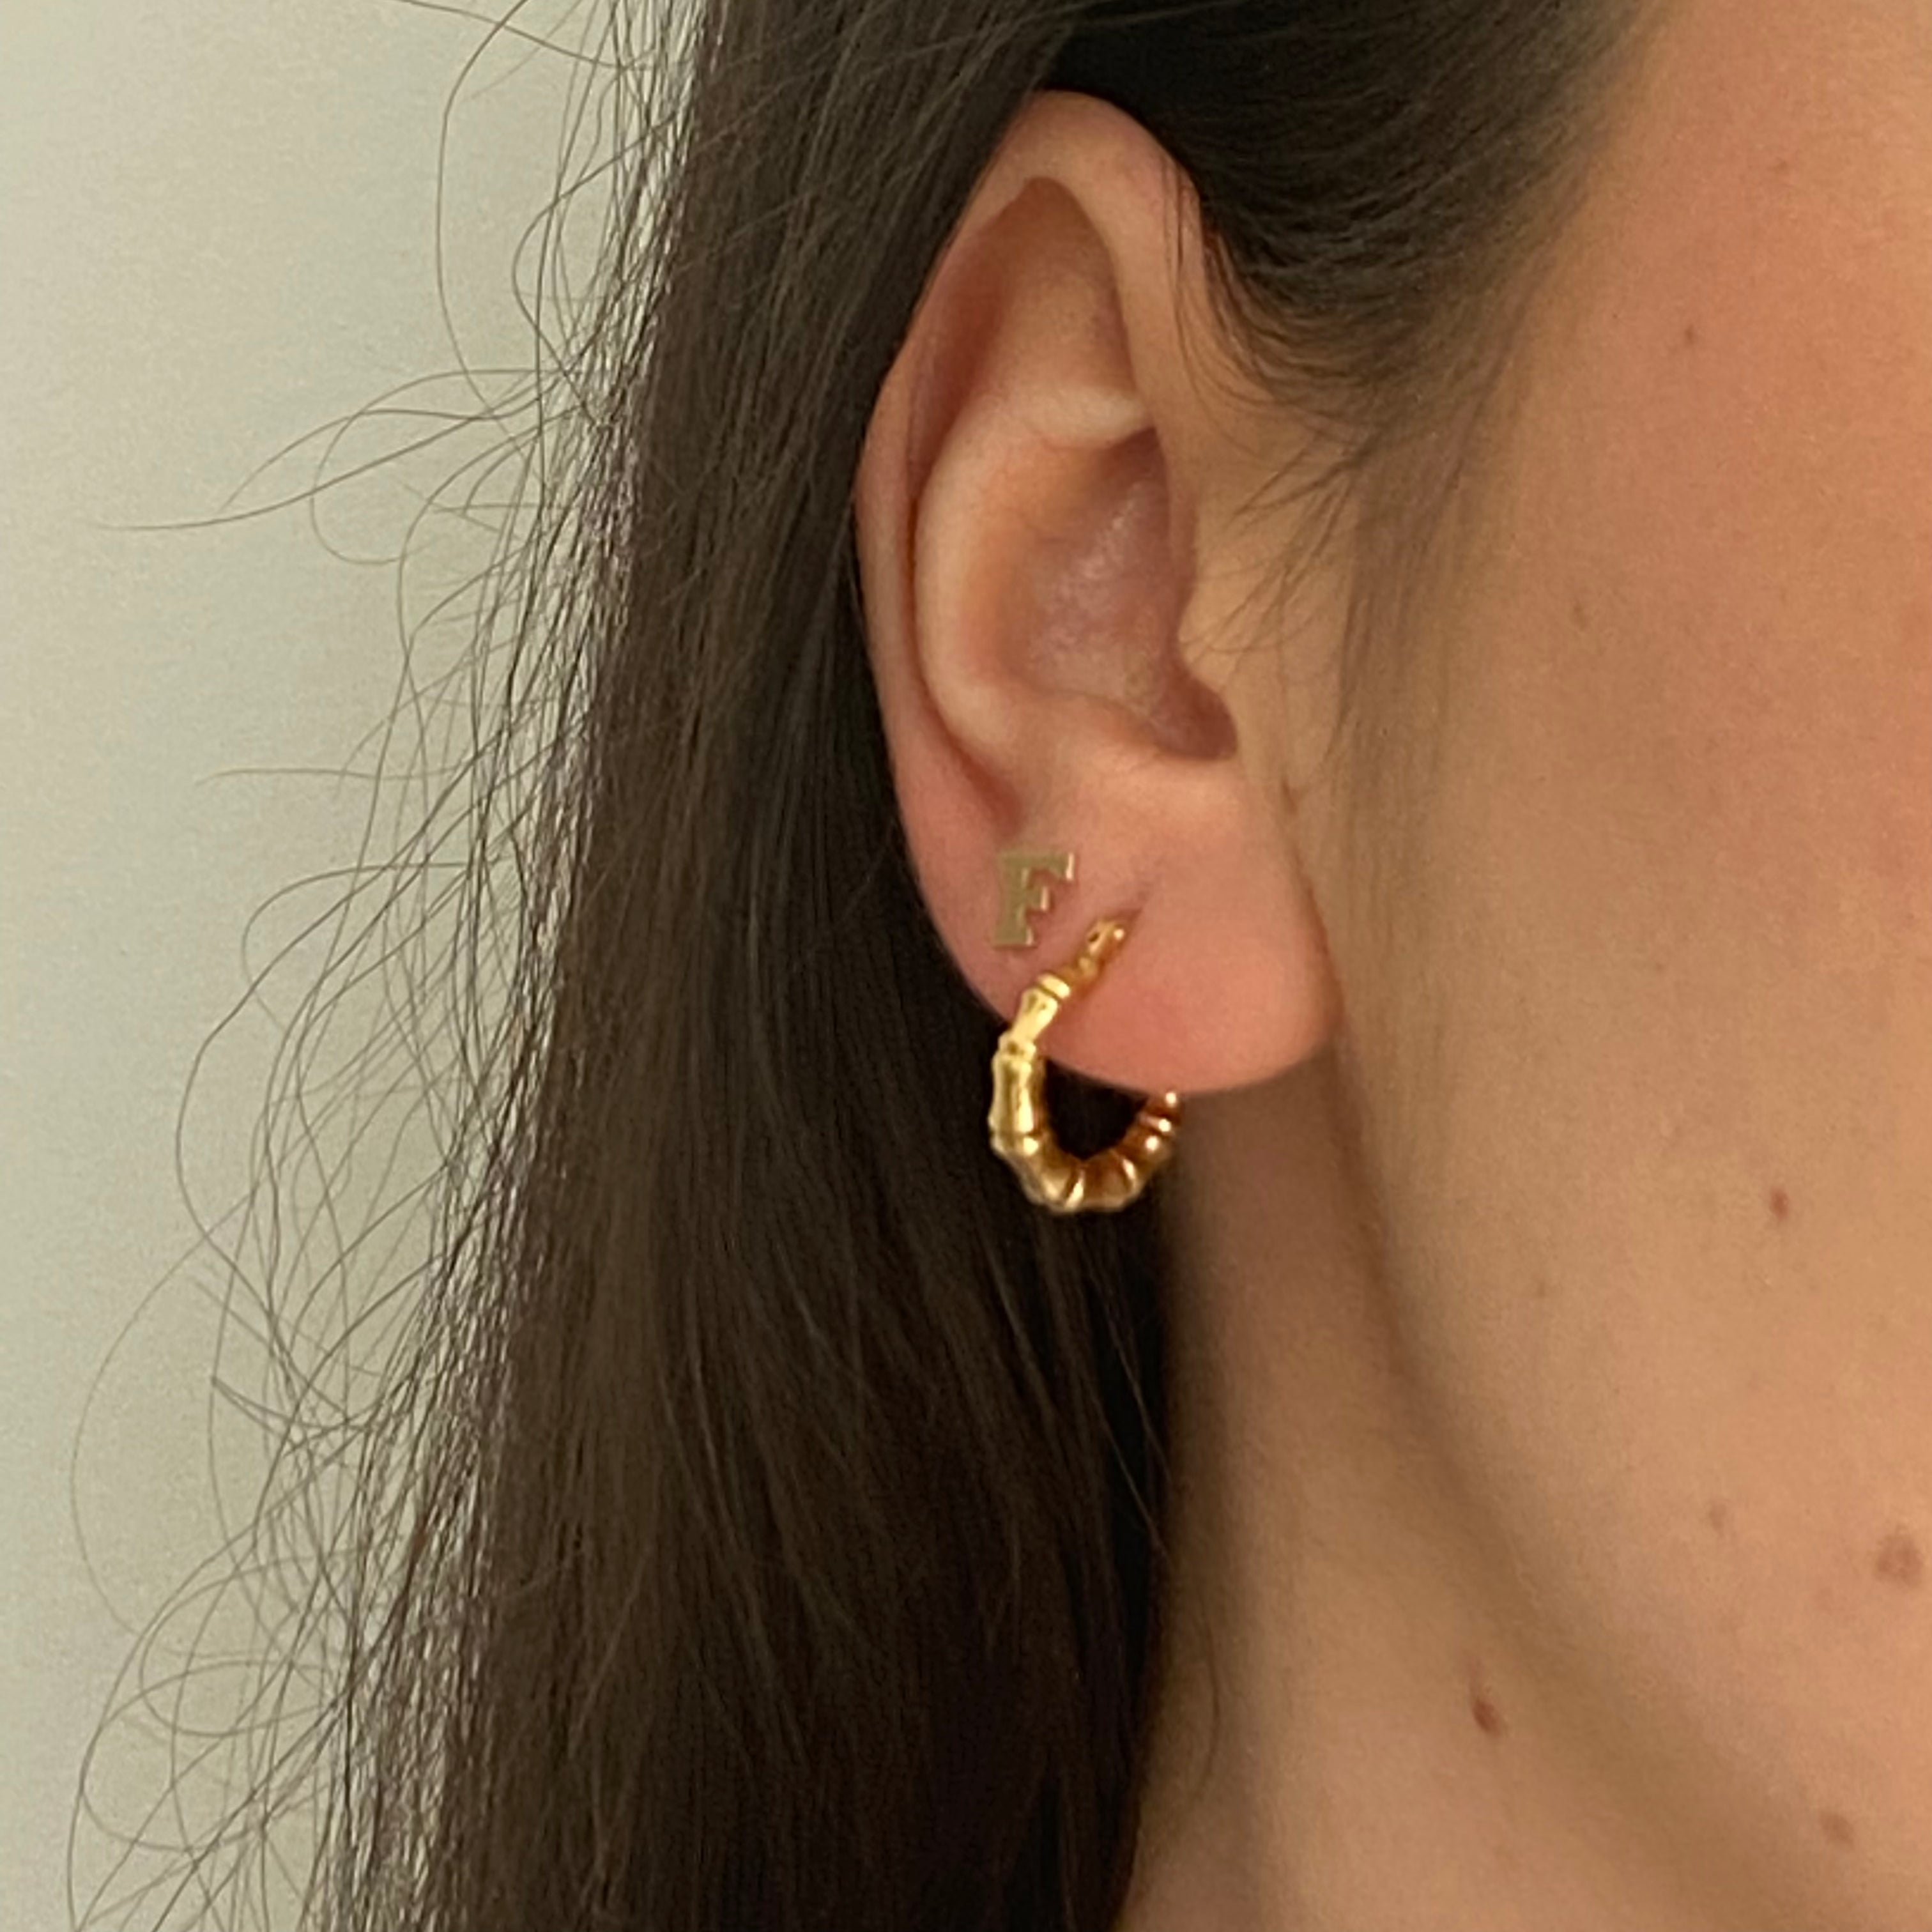 14k yellow gold Hollow Hoops with Bamboo Detail. Paired with our Block Letter Stud Earring.